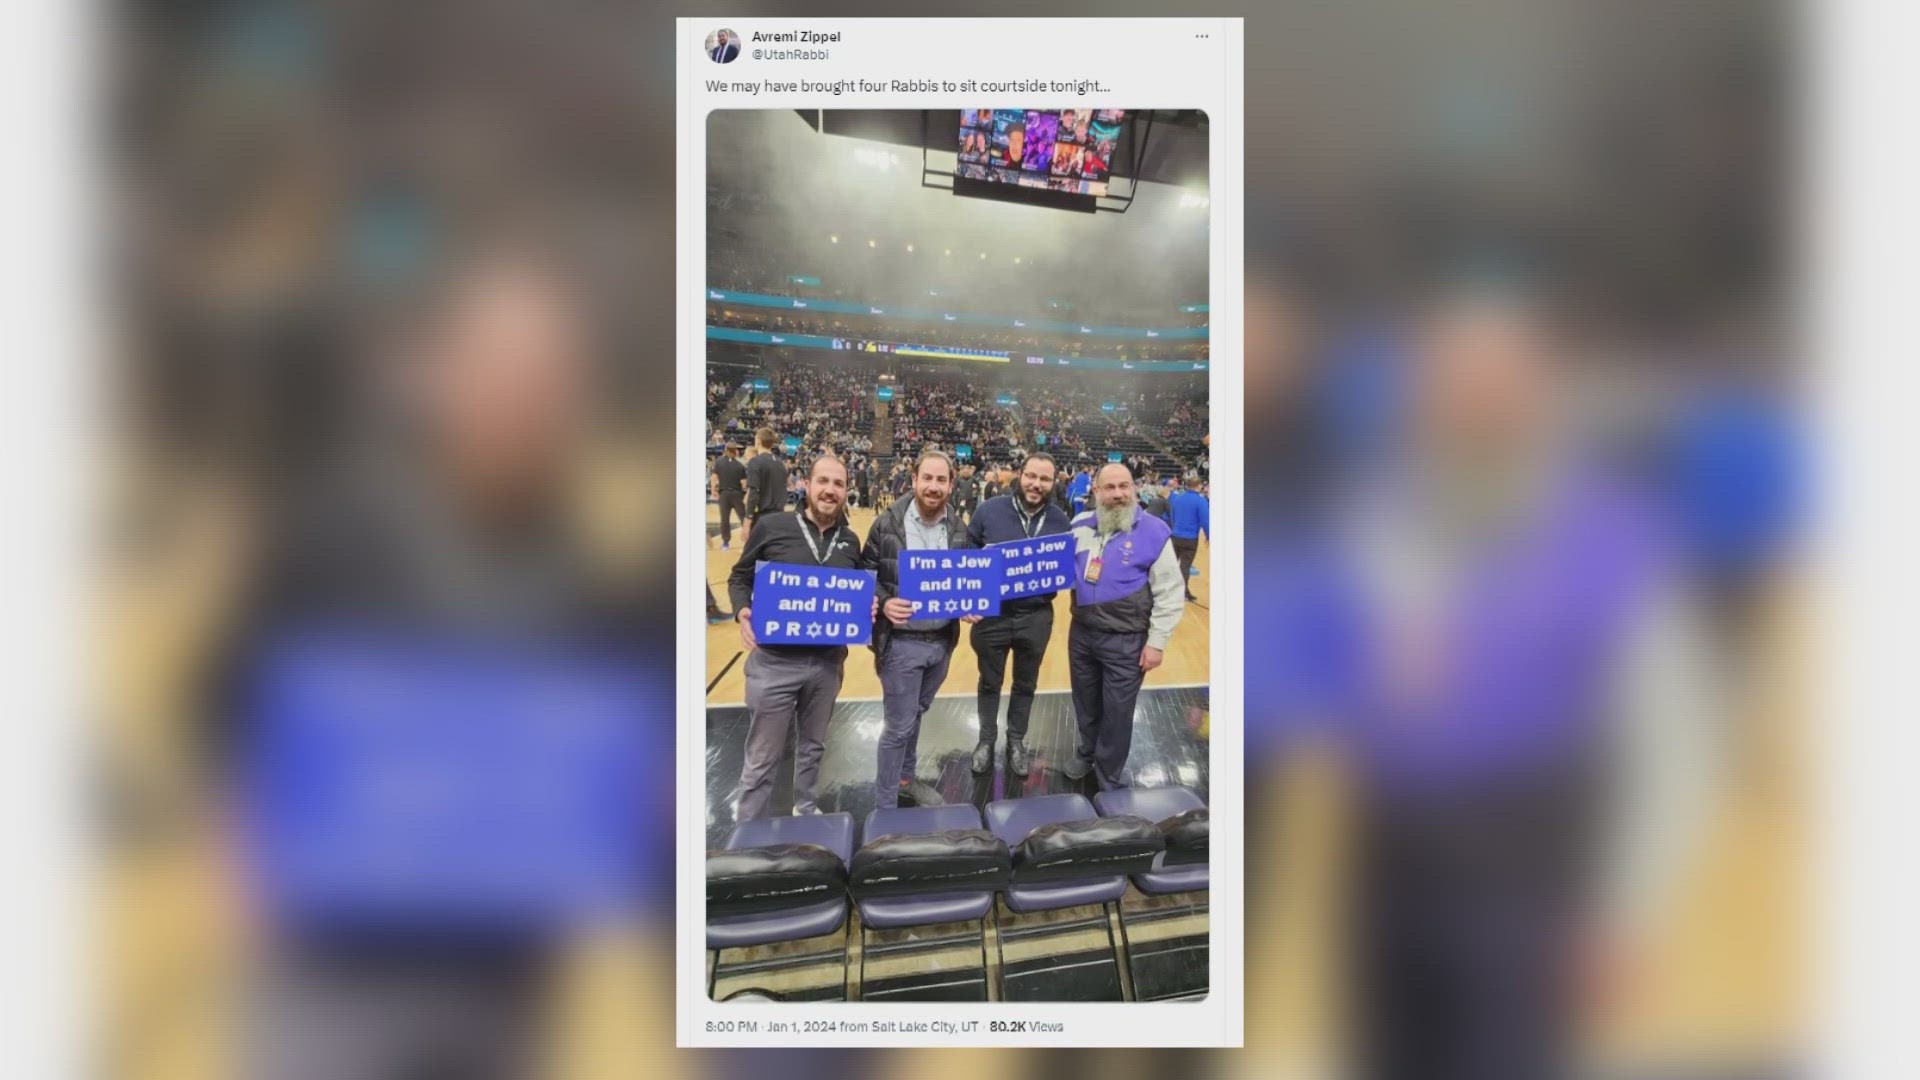 The Dallas Mavericks player was previously suspended by the Brooklyn Nets for sharing a movie containing antisemitic material.